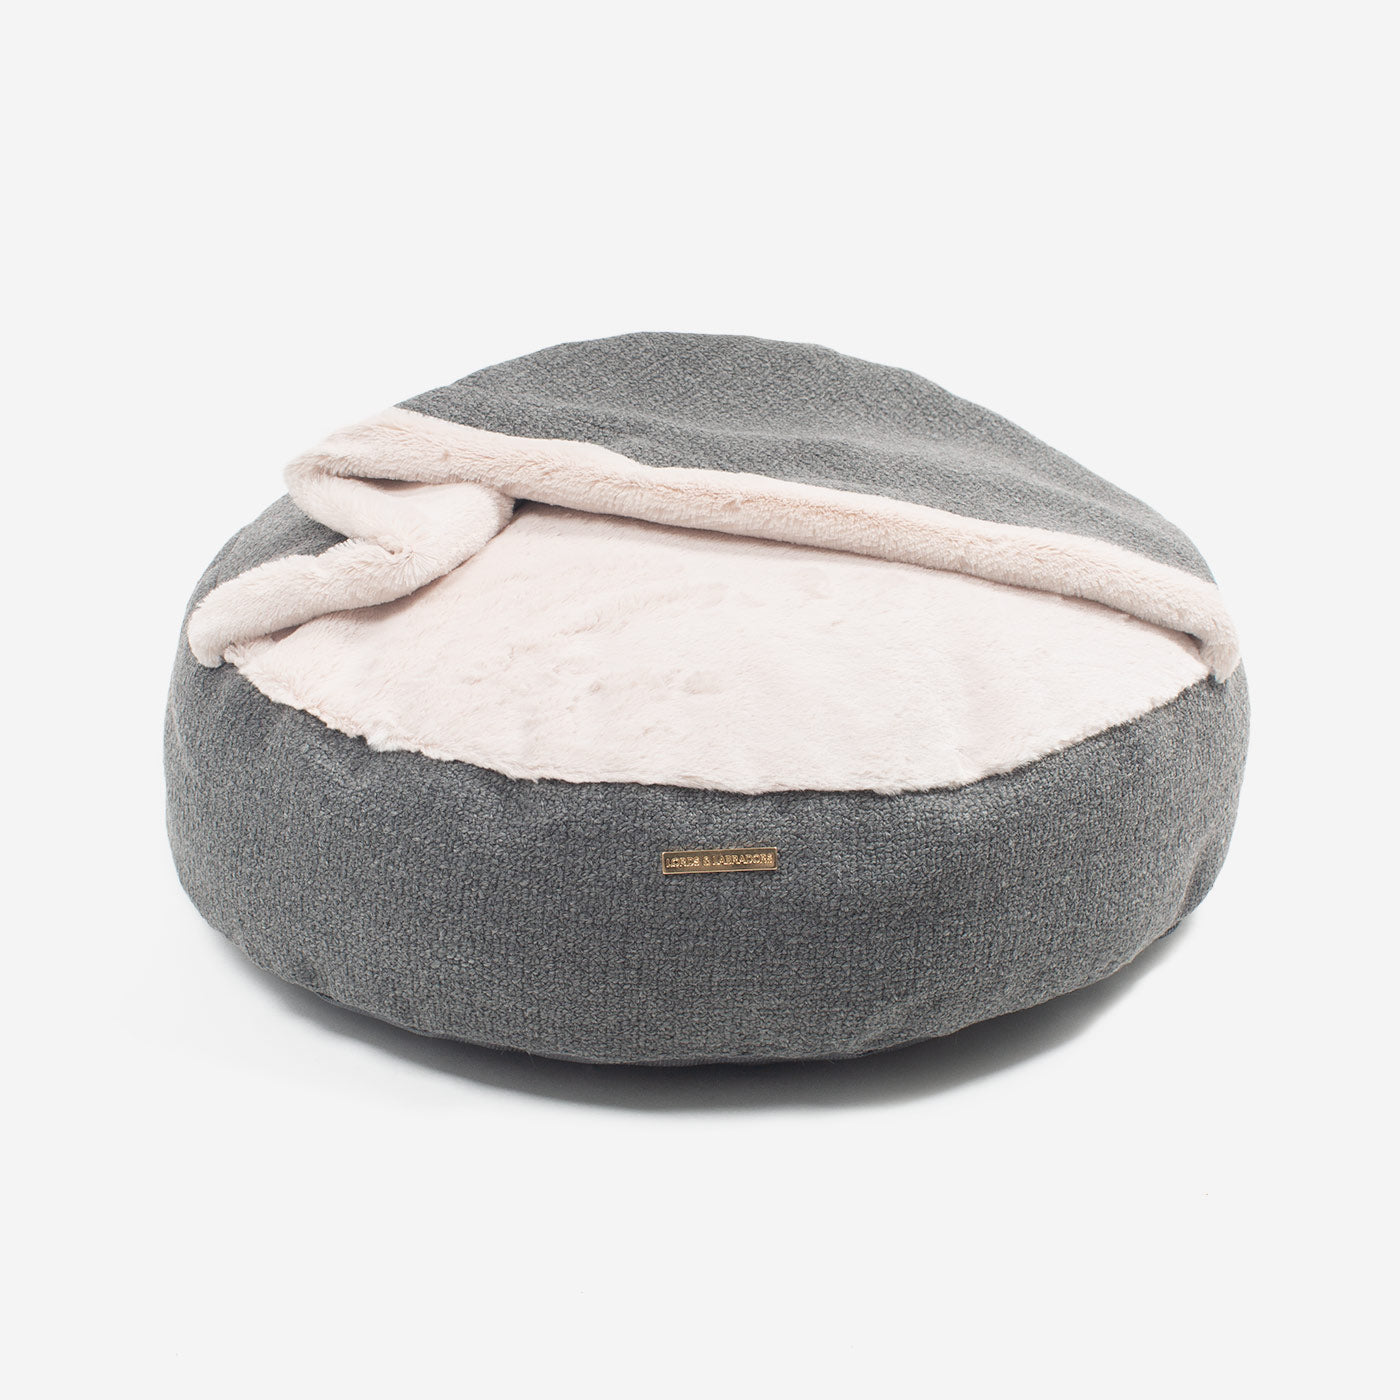 Discover This Luxurious Dog Den, Made Using Beautiful Herdwick Fabric To Craft The Perfect Den For Dogs! In Stunning Graphite, Available Now at Lords & Labradors US